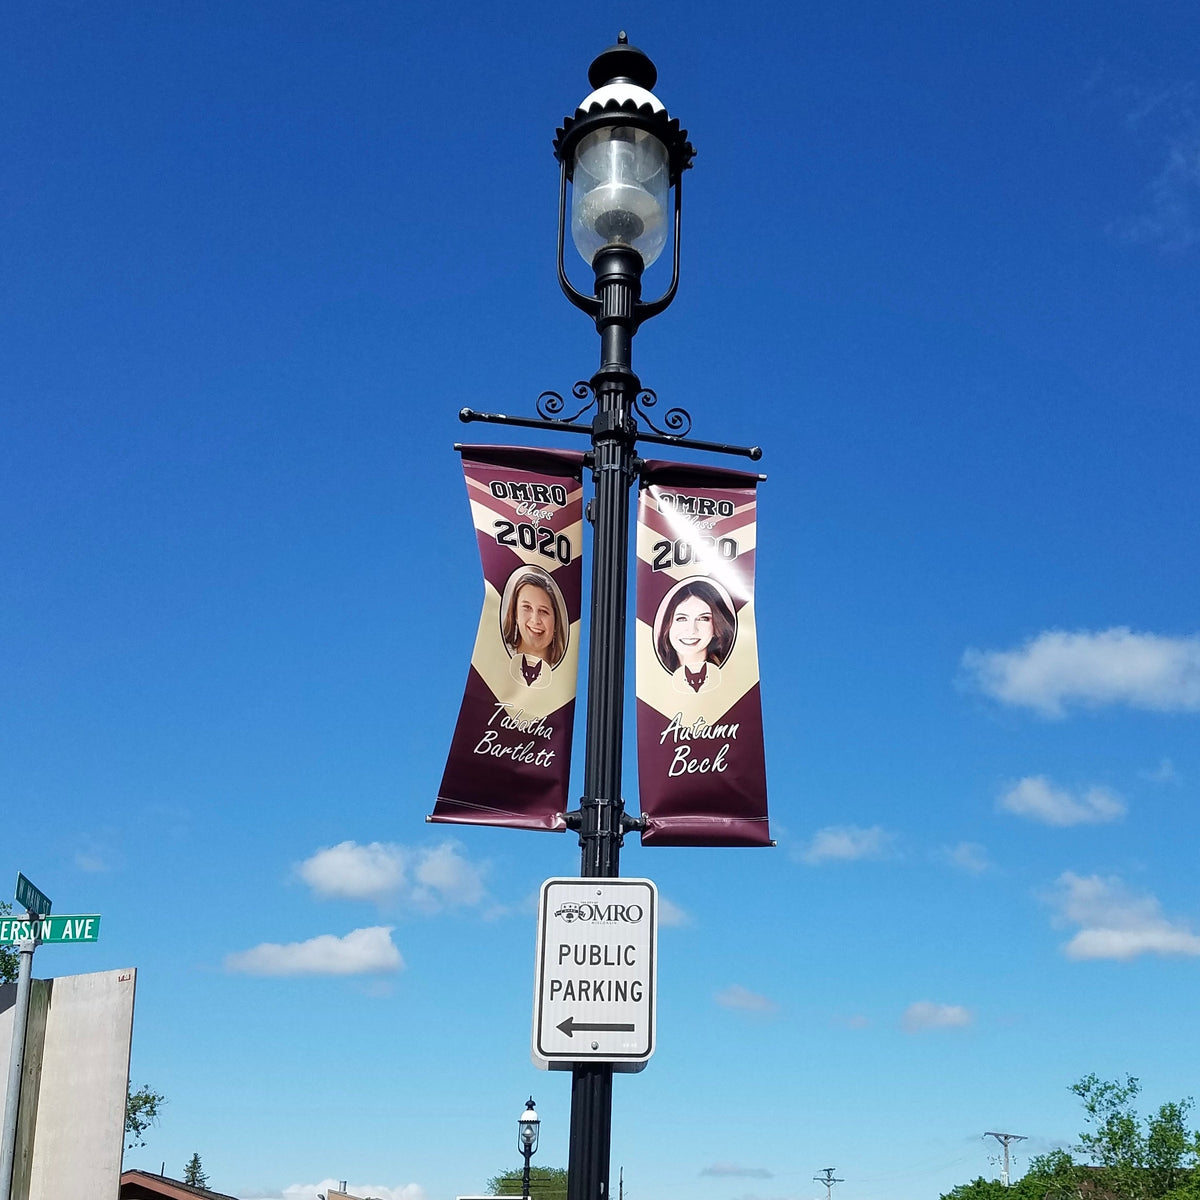 Custom Banners for Lamp Posts in Downtown